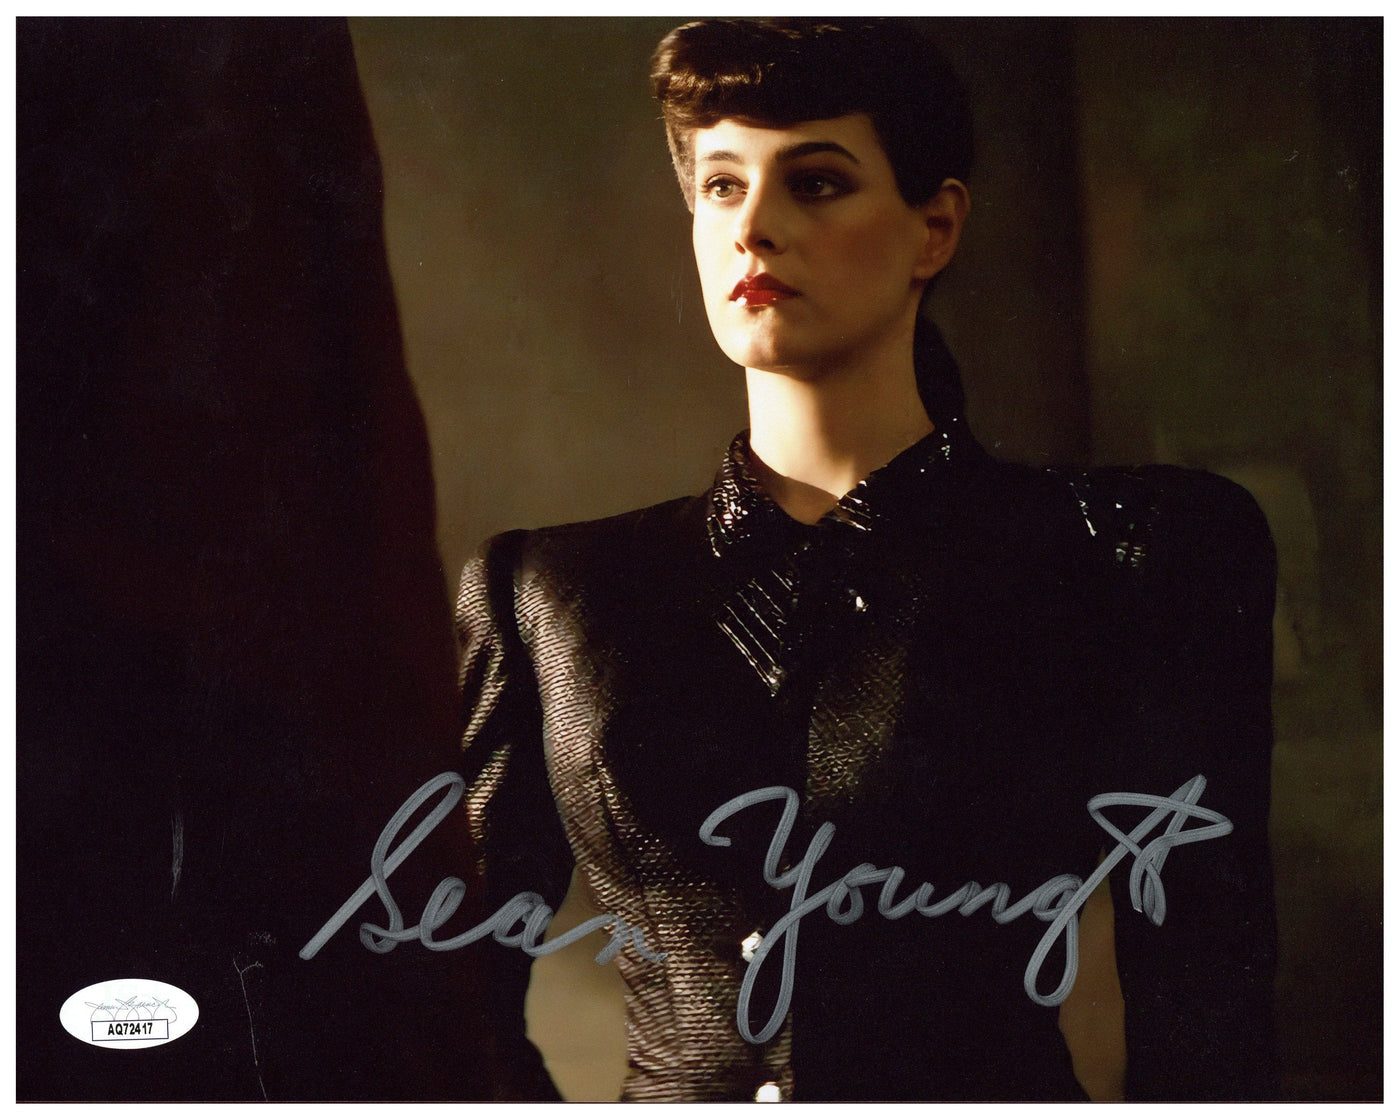 Sean Young Signed 8x10 Photo Blade Runner Authentic Autographed JSA COA 3